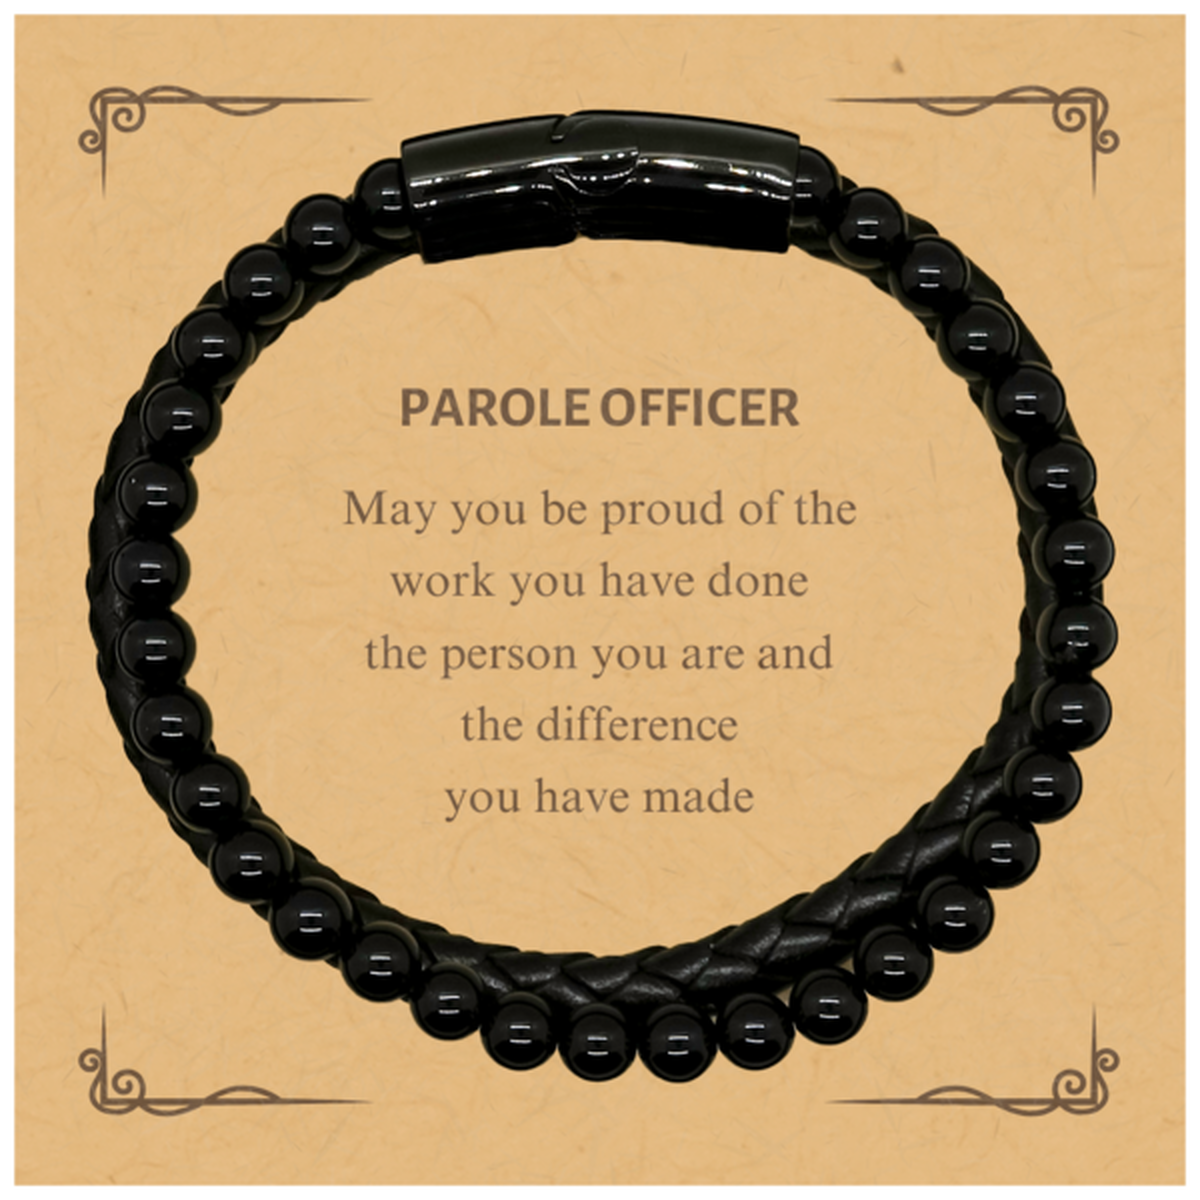 Parole Officer May you be proud of the work you have done, Retirement Parole Officer Stone Leather Bracelets for Colleague Appreciation Gifts Amazing for Parole Officer